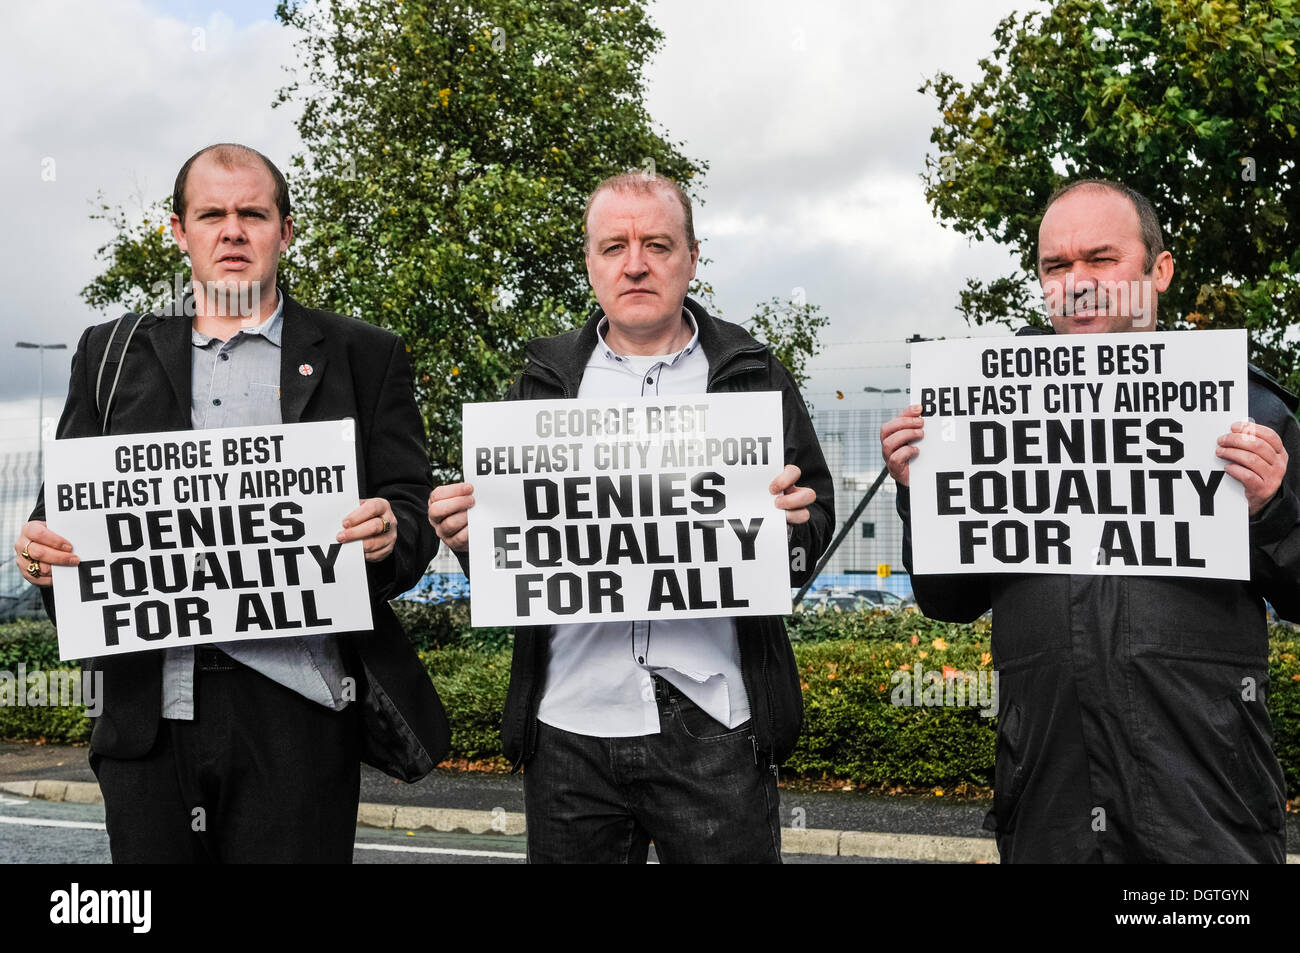 Belfast, Northern Ireland, UK. 25th Oct 2013.  Three members of the Protestant Coalition hold protest banners saying 'George Best Belfast City Airport denies equality for all' after a taxi contract was awarded to Value Cabs following months of sectarian wrangling by previous drivers. Credit:  Stephen Barnes/Alamy Live News Stock Photo